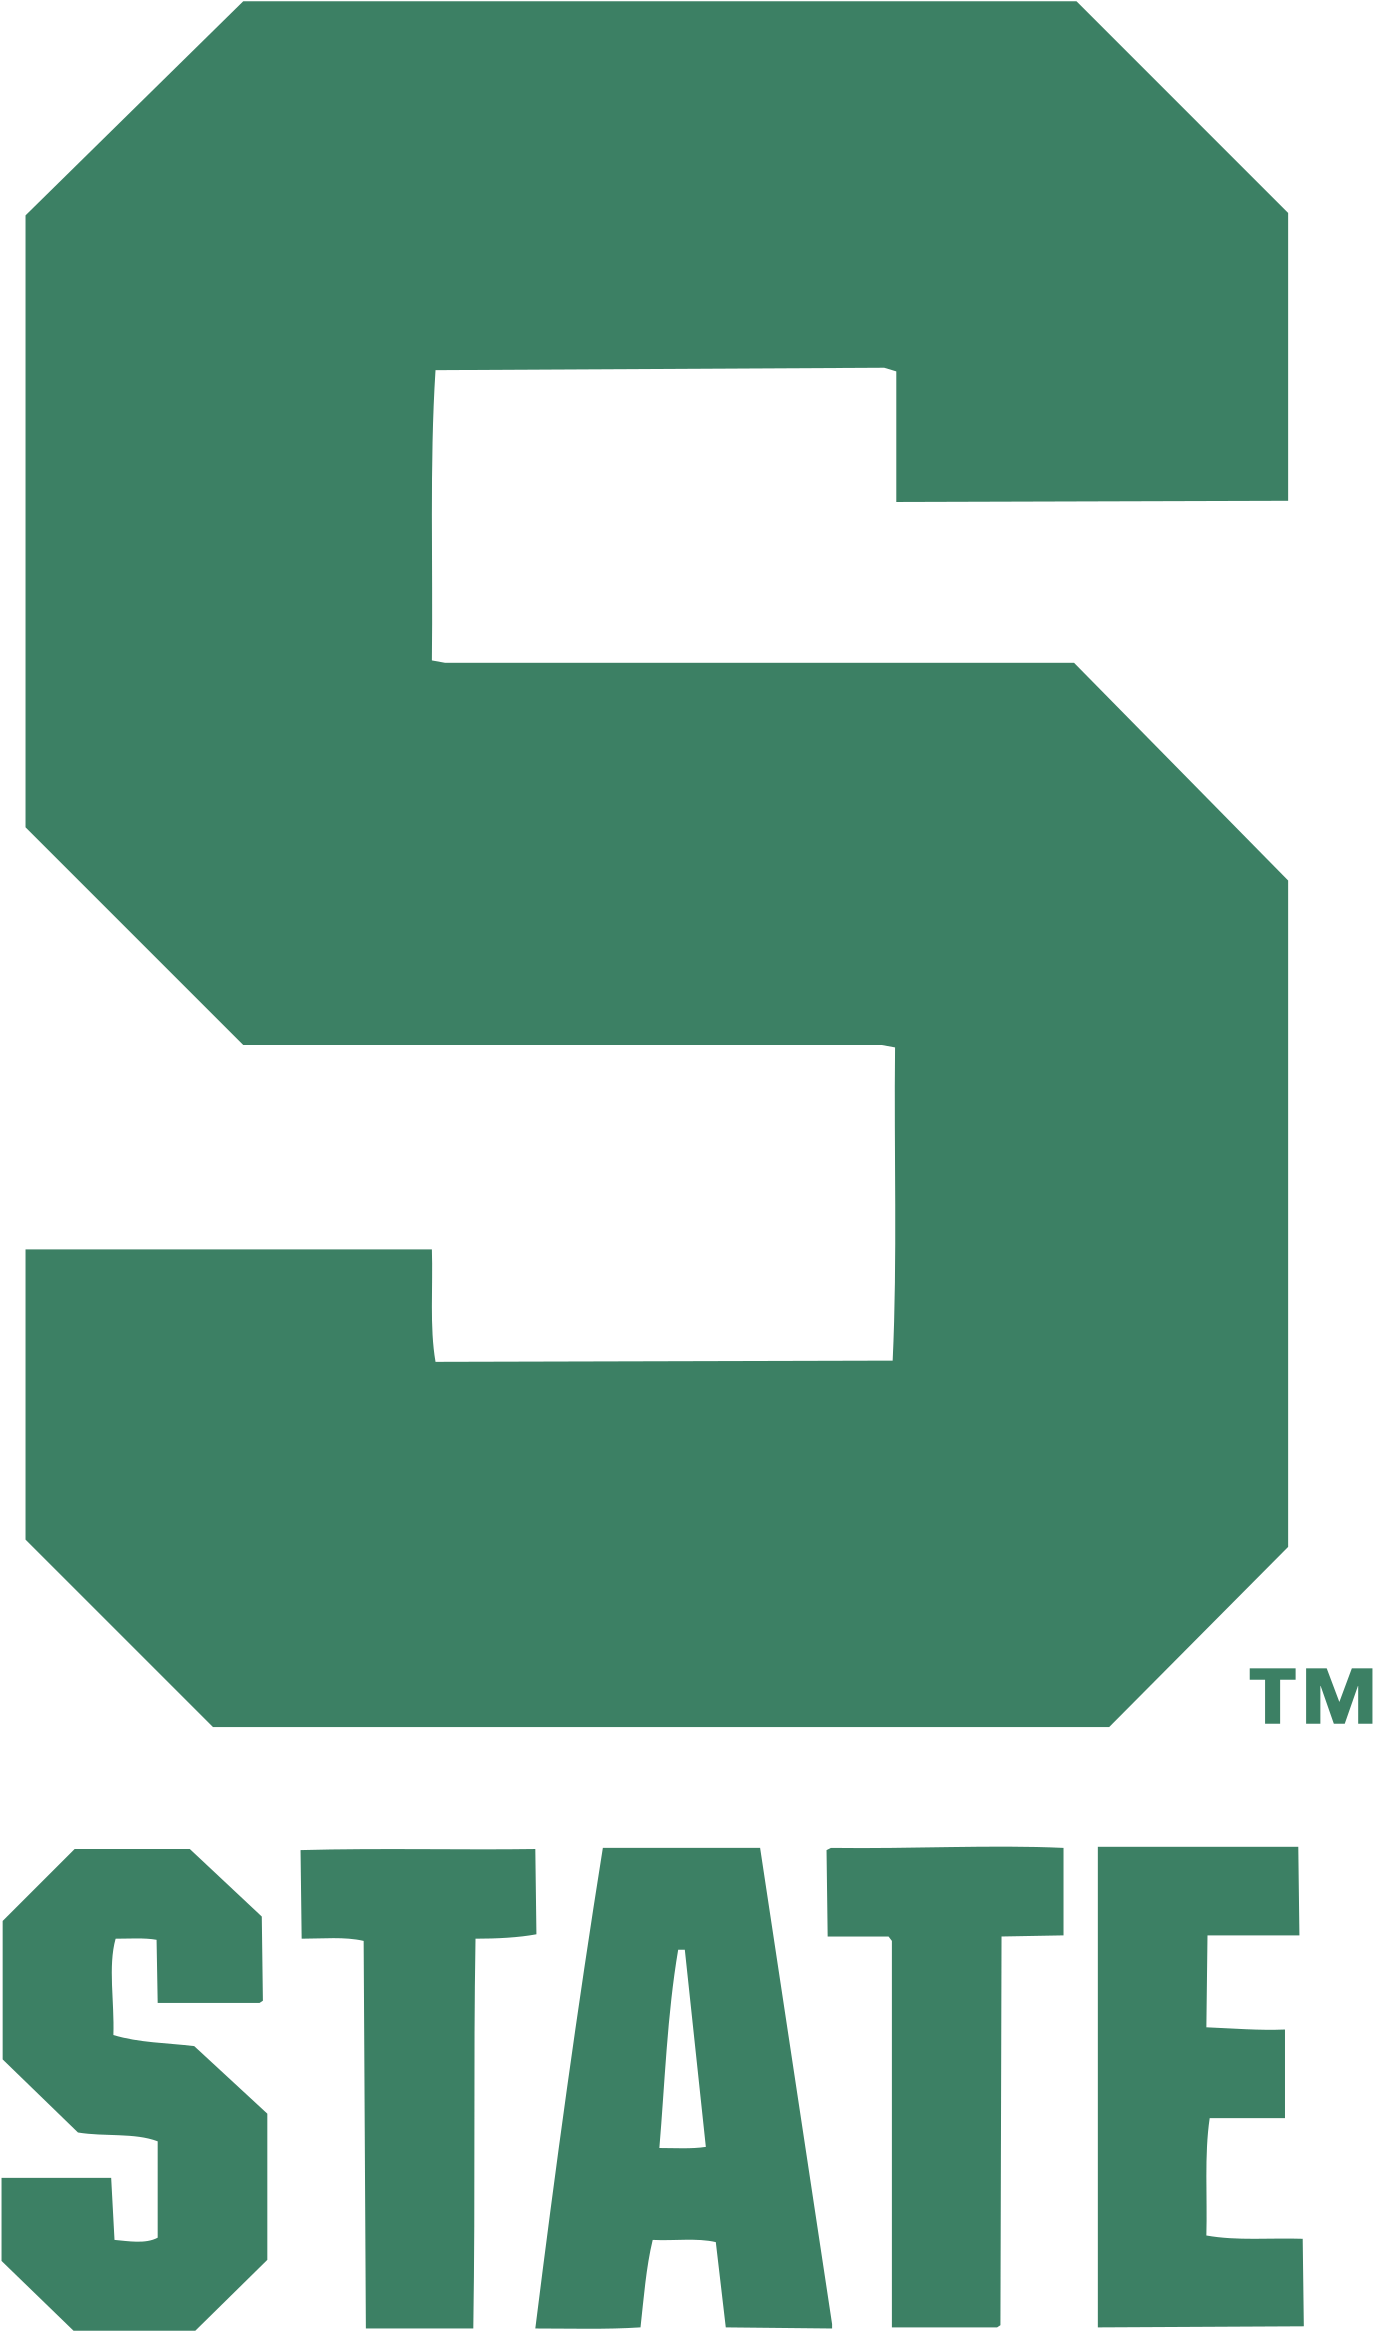 Michigan State Spartans Logo Png Transparent - Michigan State University Spartans Drink Coasters, (2400x2400)